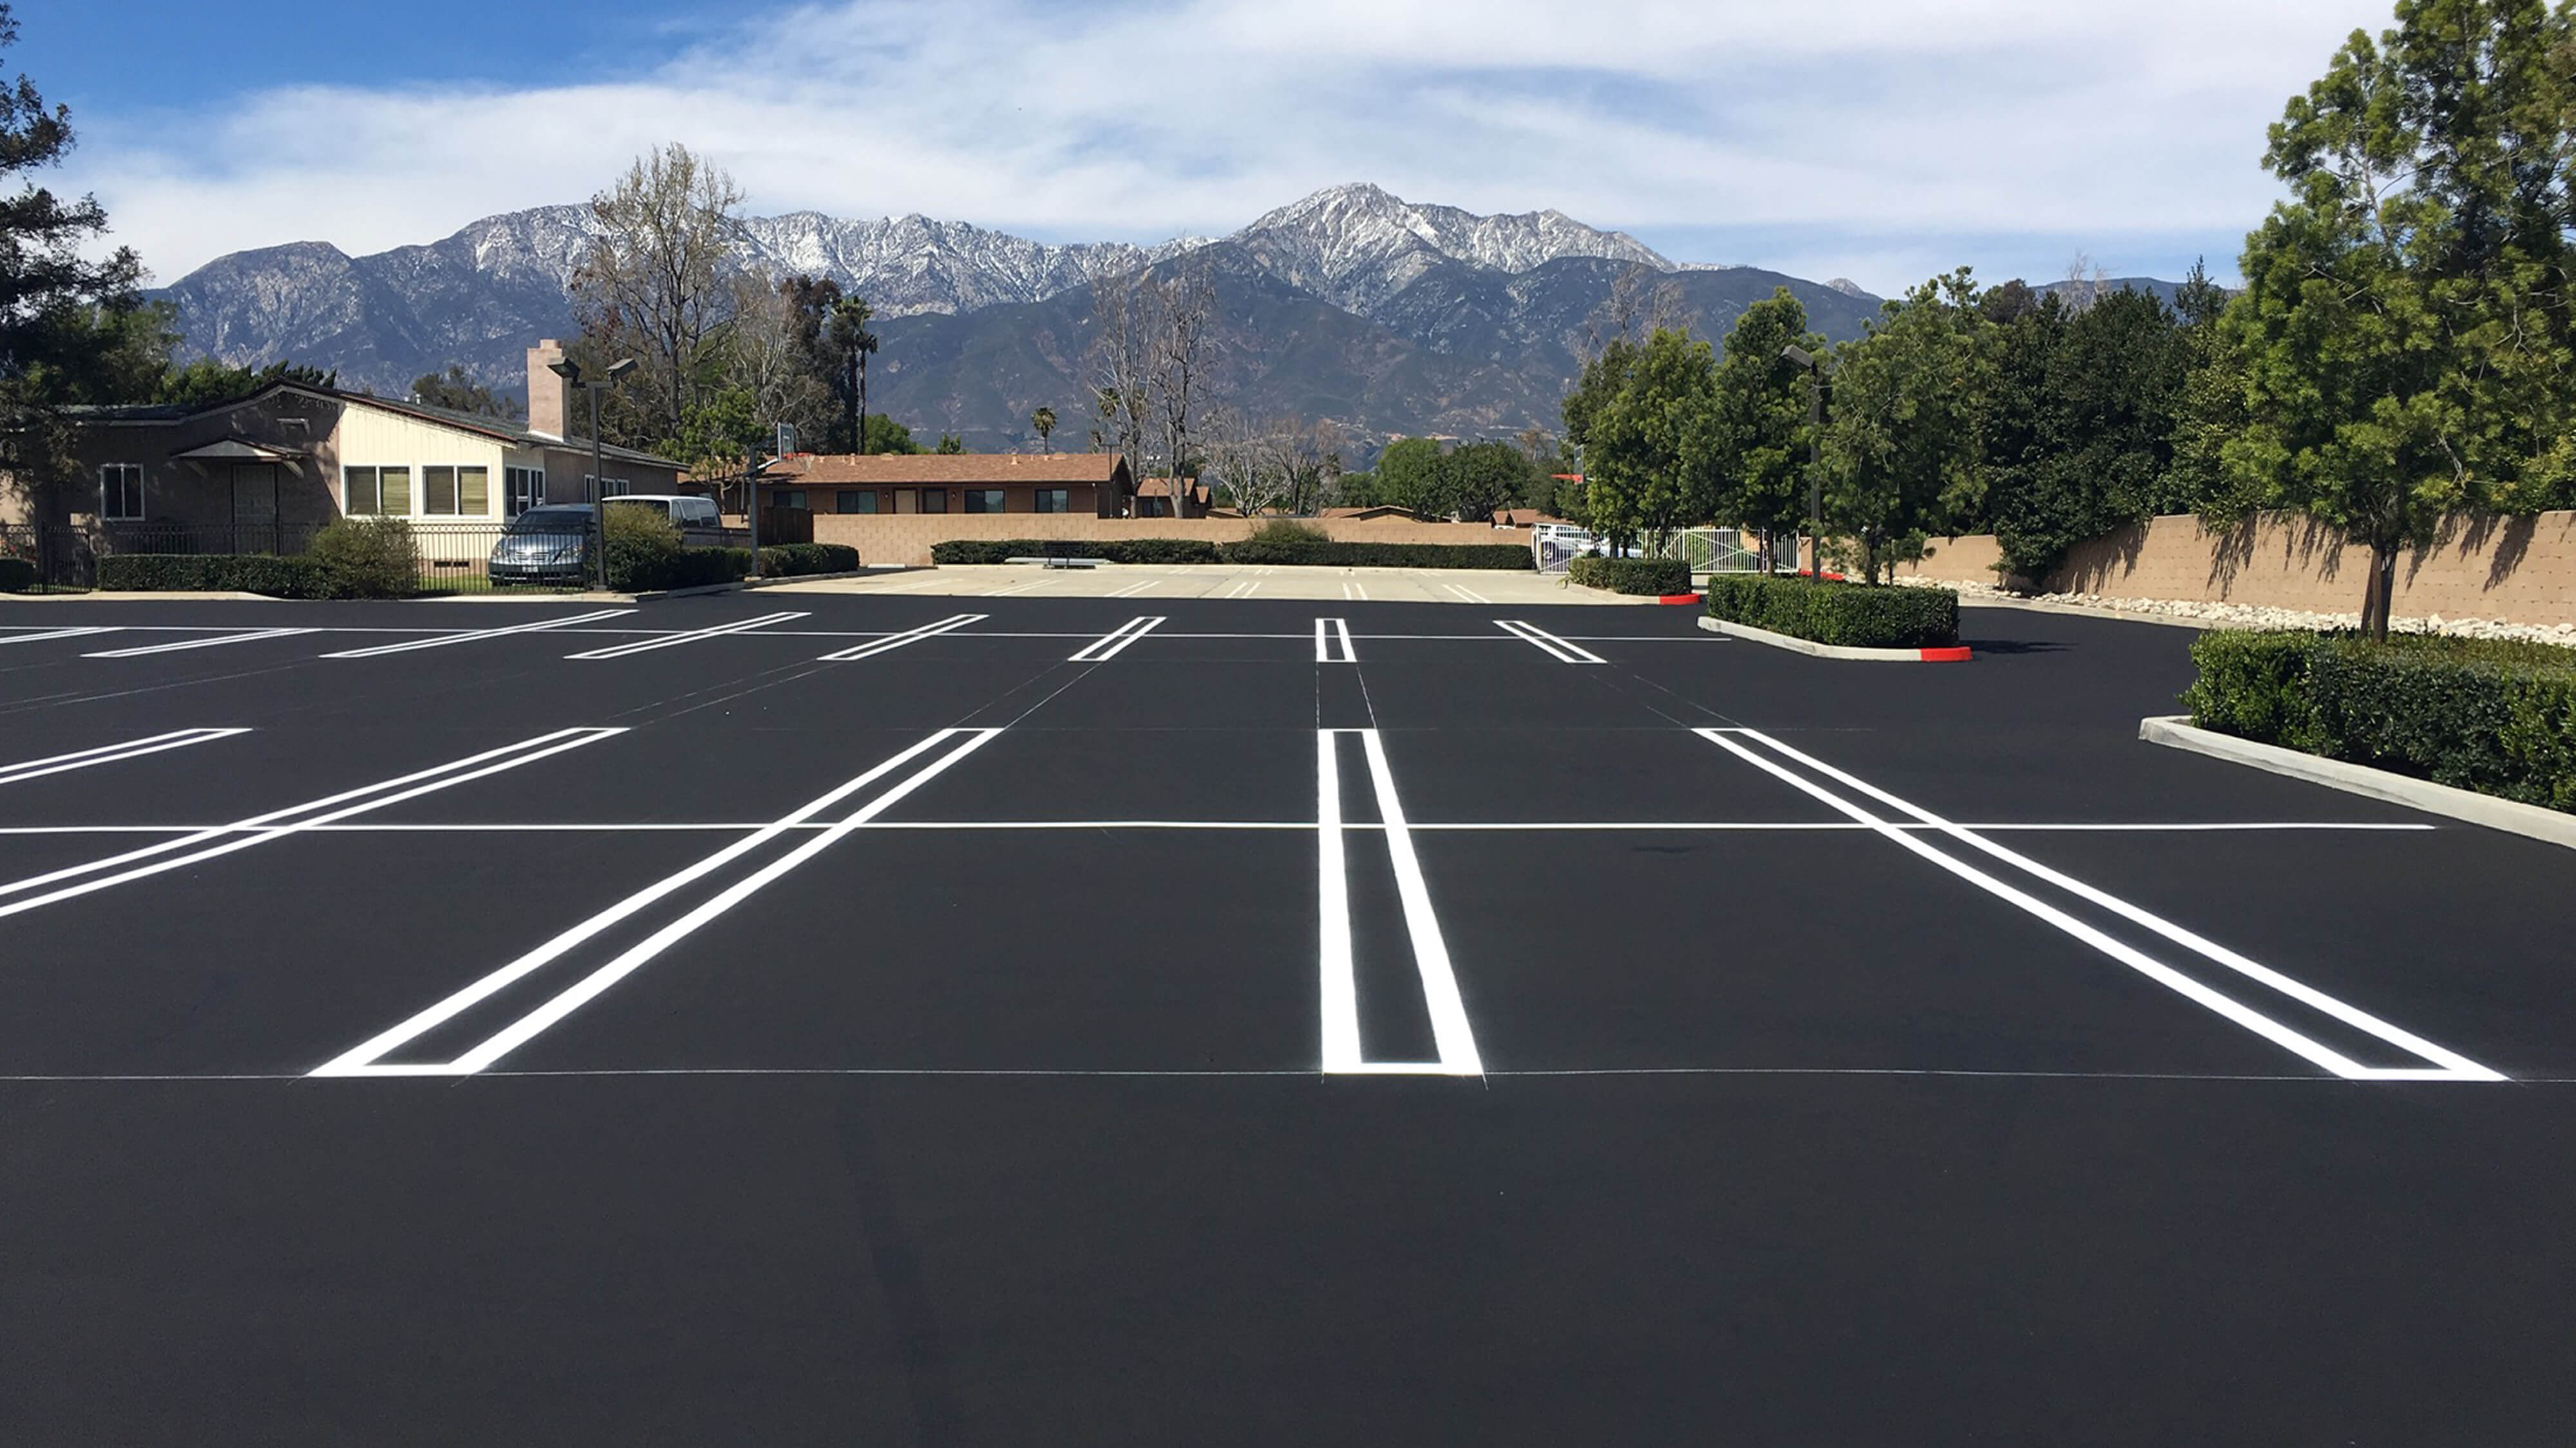 How To: Parking Lot Striping Layout